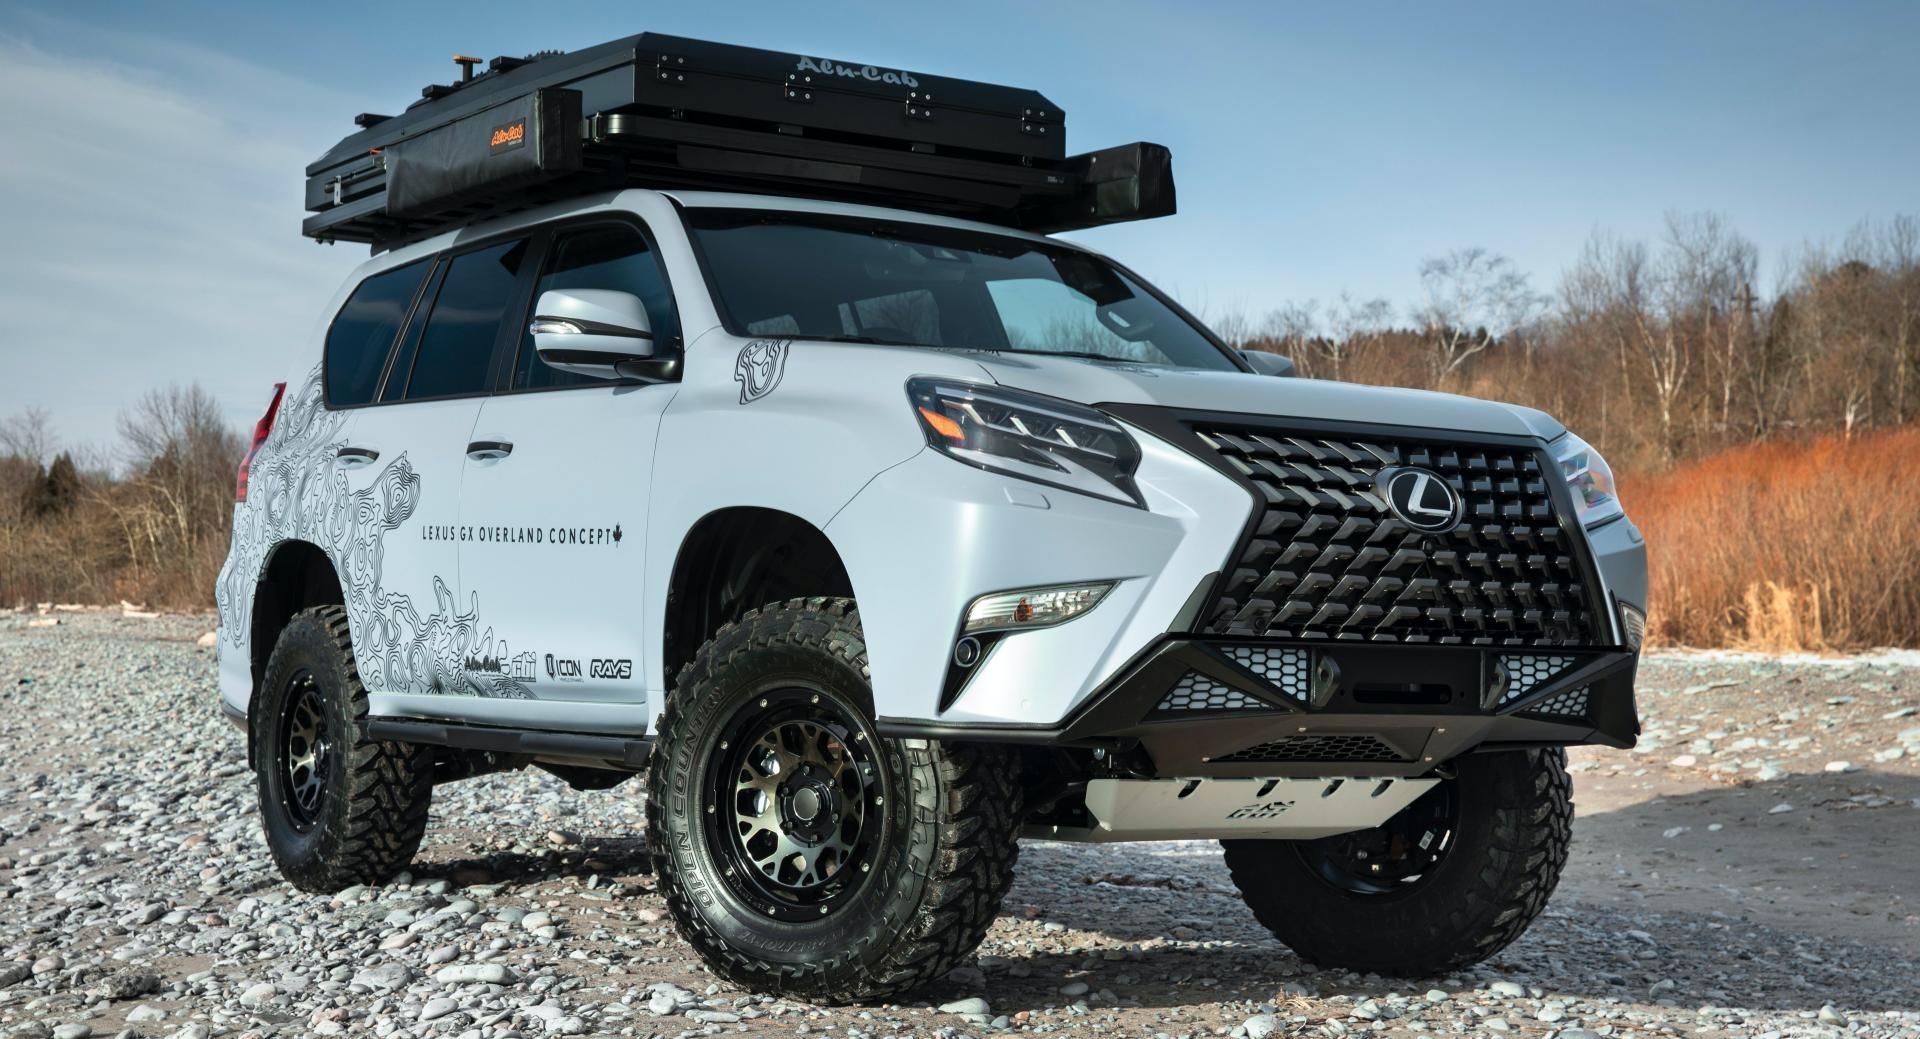 Lexus GX 460 470 concept lifted overland off road suspension body-on-frame unibody travel rally speed crawl modified skid plate